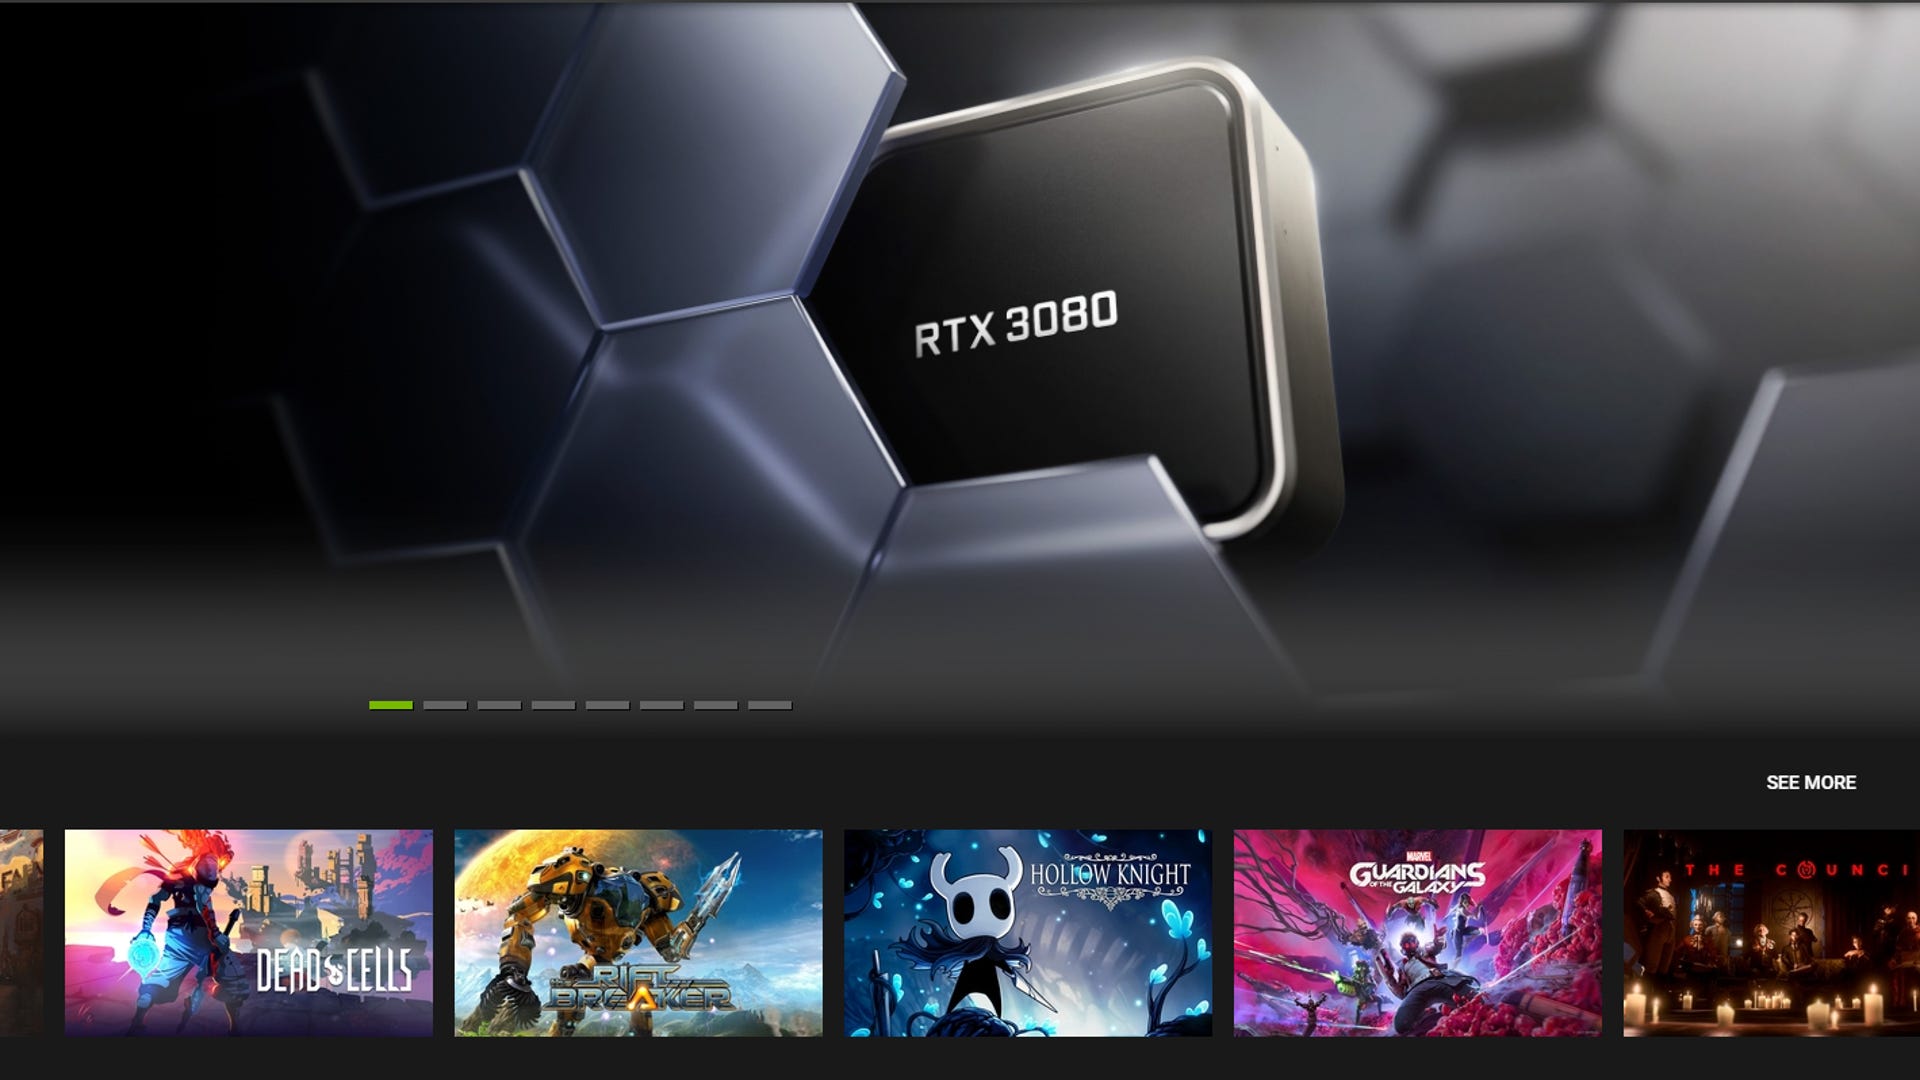 GeForce Now game selection screen